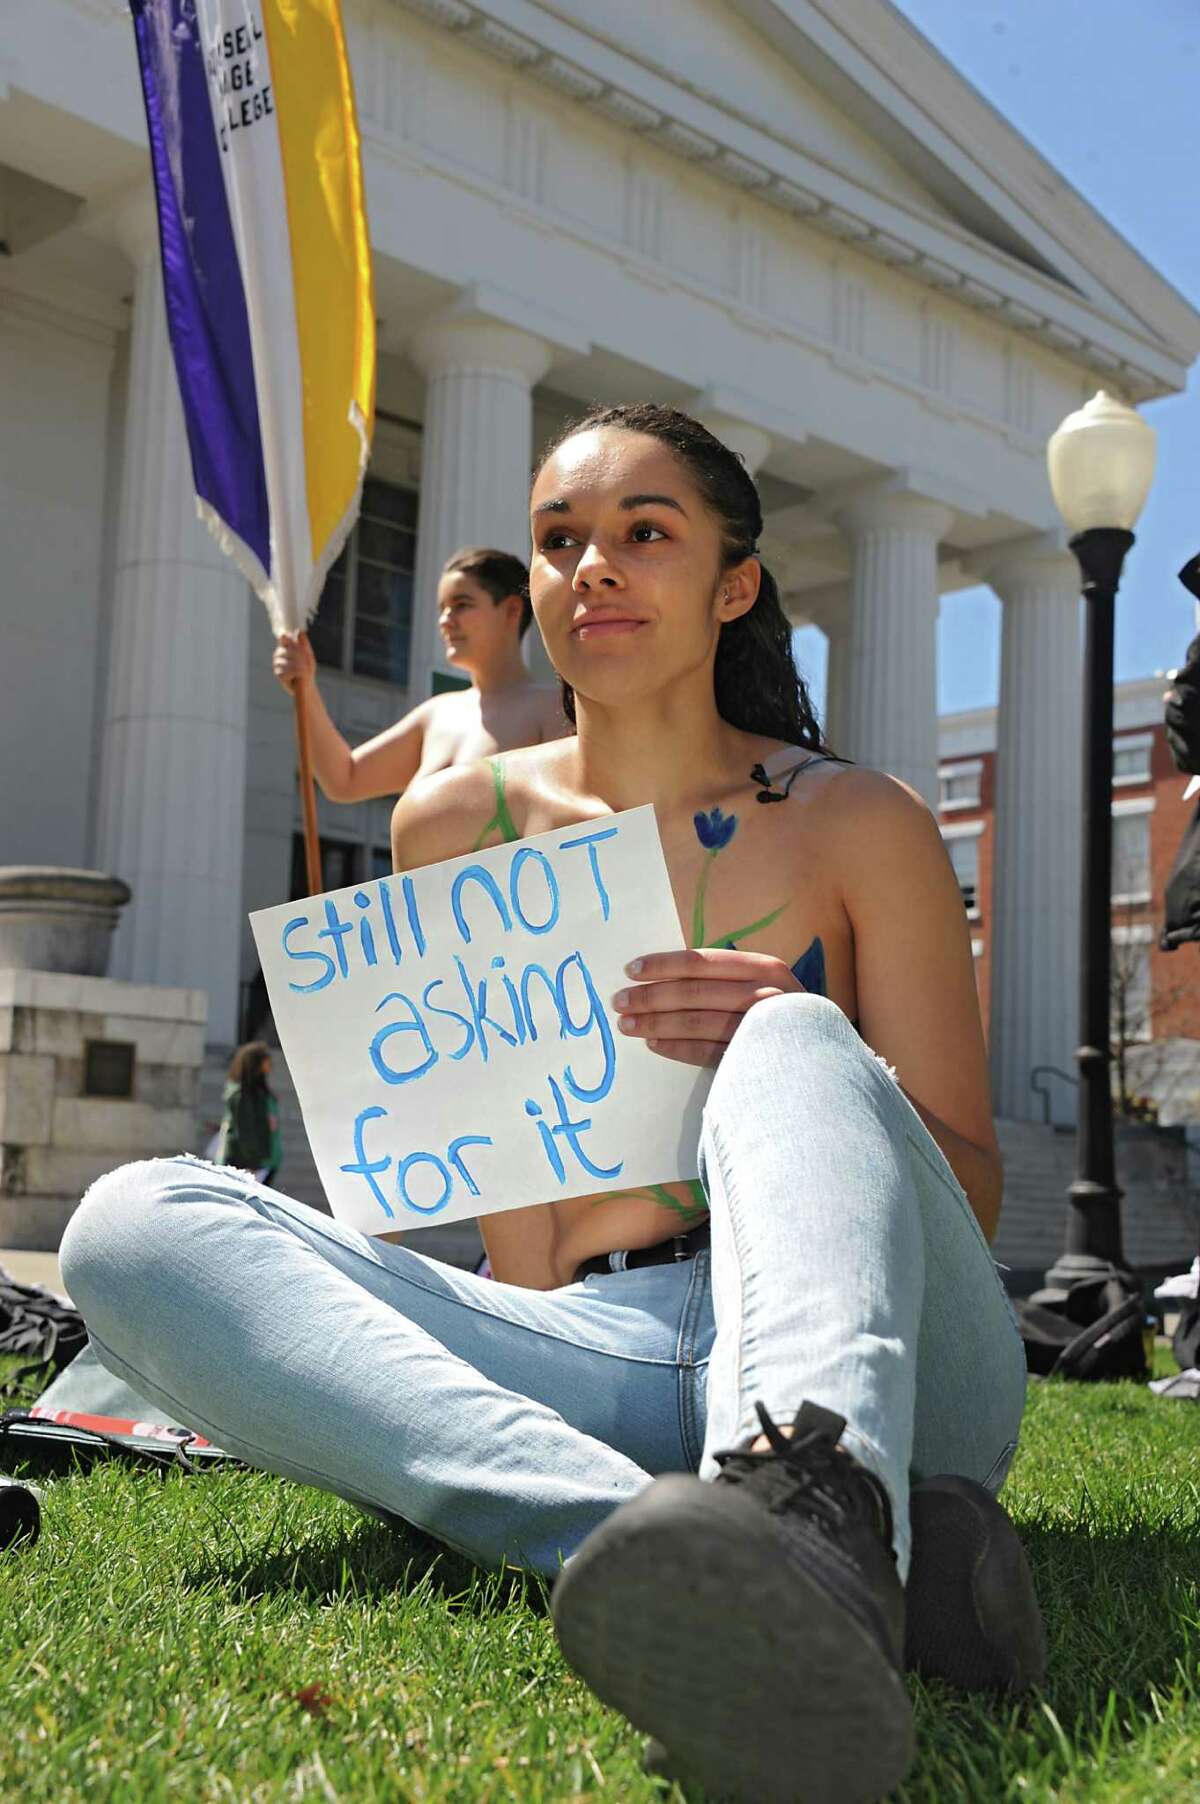 Katie Giarratano, a senior Russell Sage student from Liberty, N.Y., holds a sign as students upset by police treatment of Cedar Brock, behind her, hold a topless protest in Sage Park on the Russell Sage College campus Wednesday, April 120, 2016 in Troy, N.Y. A school security officer approached Cedar, a student who identifies as androgynous, who was sunbathing topless in a public park that fronts the campus. (Lori Van Buren / Times Union)